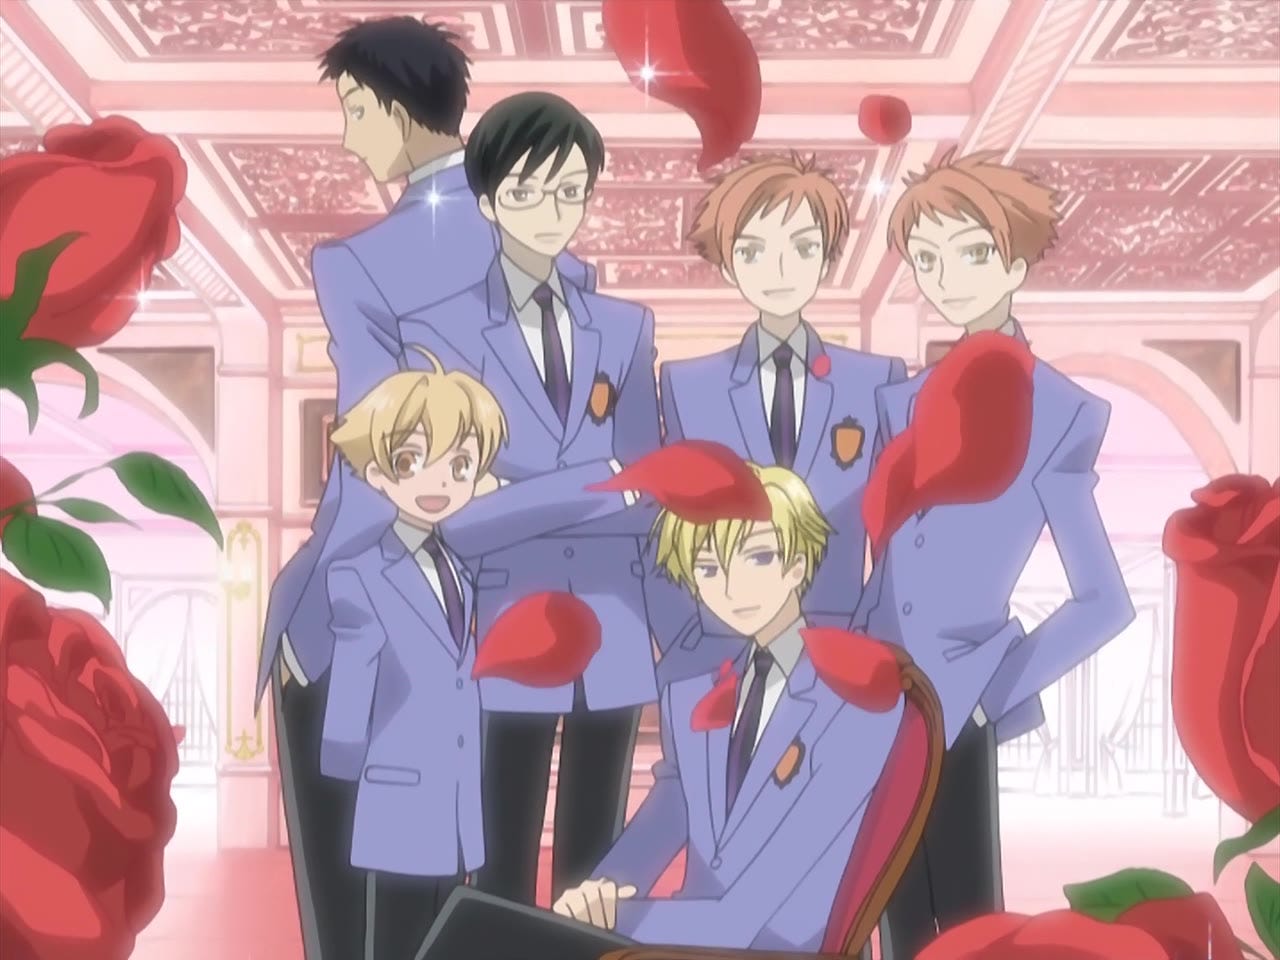 A screenshot from episode 1 of Ouran High School Host Club showing the main cast of characters surrounded by roses.